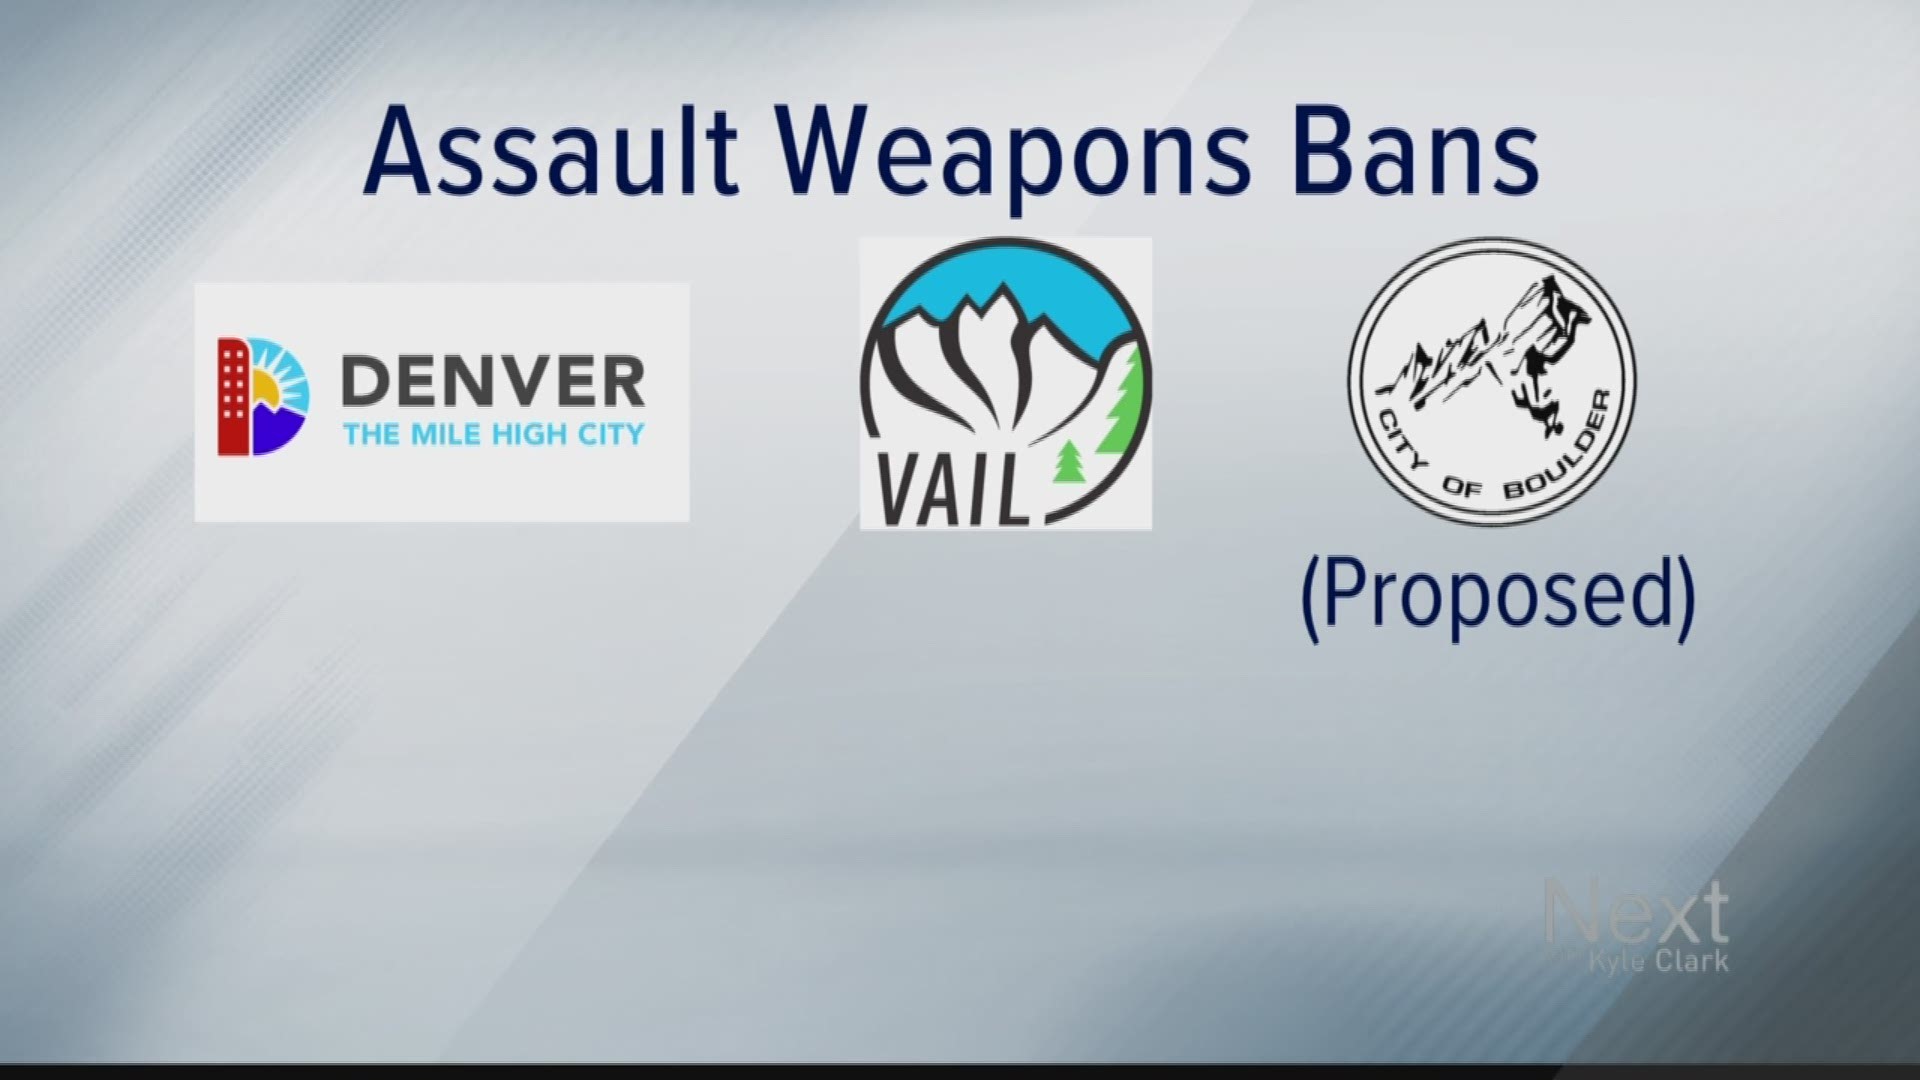 It looks like similar bans in Vail... but has a few differences. Our Steve Staeger takes a deeper look.